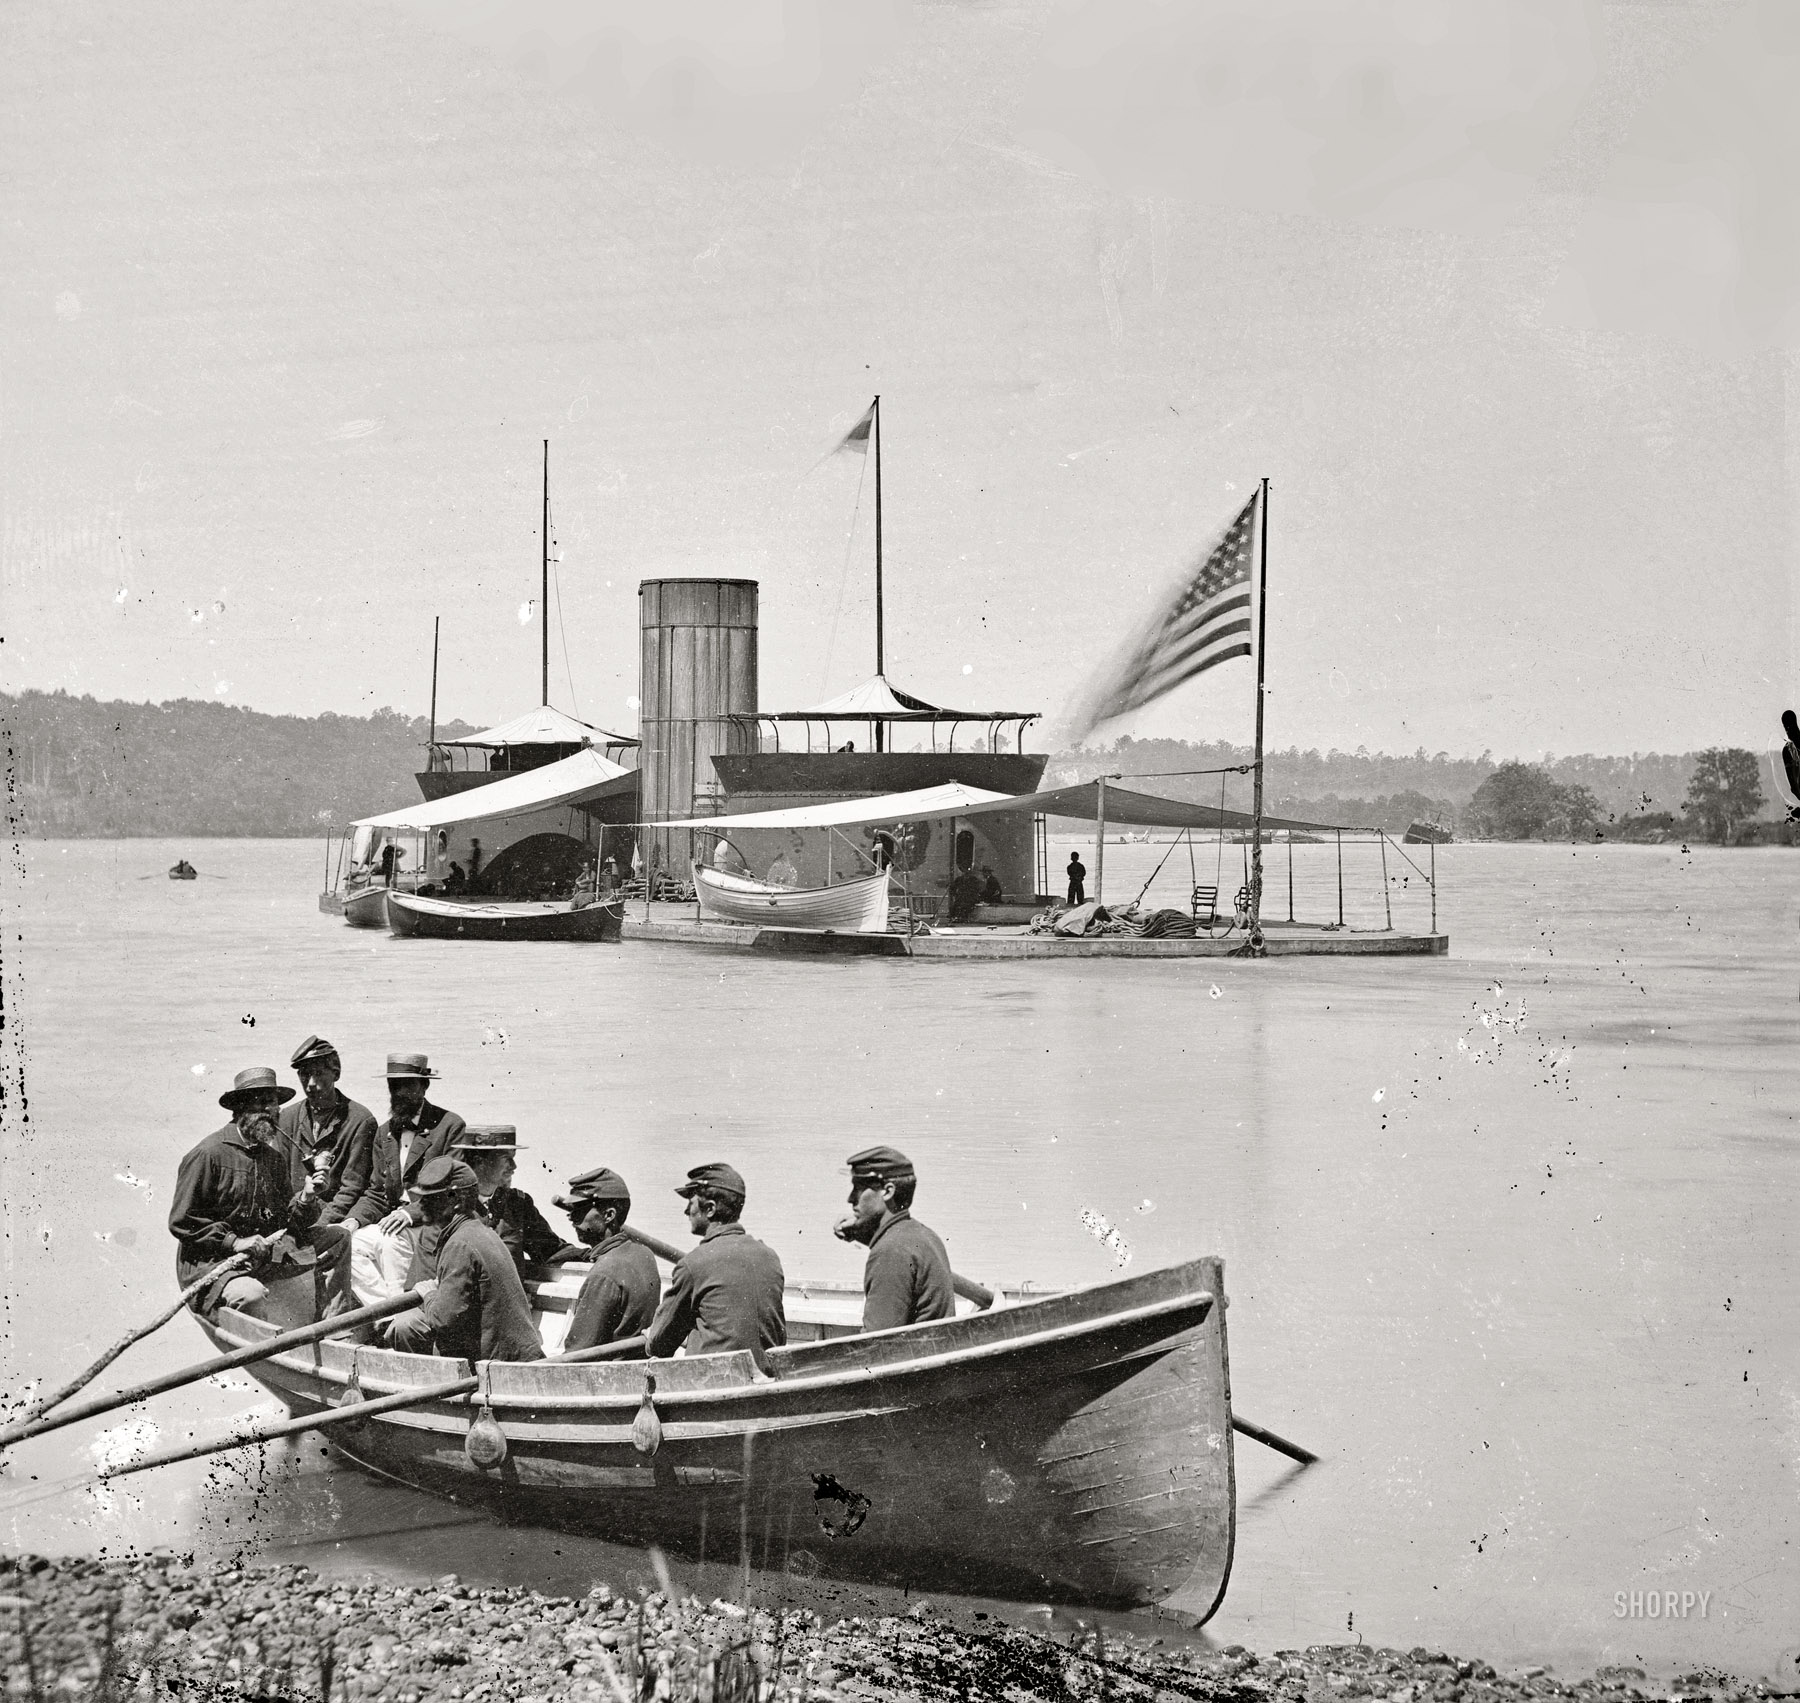 1864. "James River, Virginia. Monitor U.S.S. Onondaga; soldiers in rowboat. From photographs of the Federal Navy, and seaborne expeditions against the Atlantic Coast of the Confederacy." Wet plate glass negative. View full size.